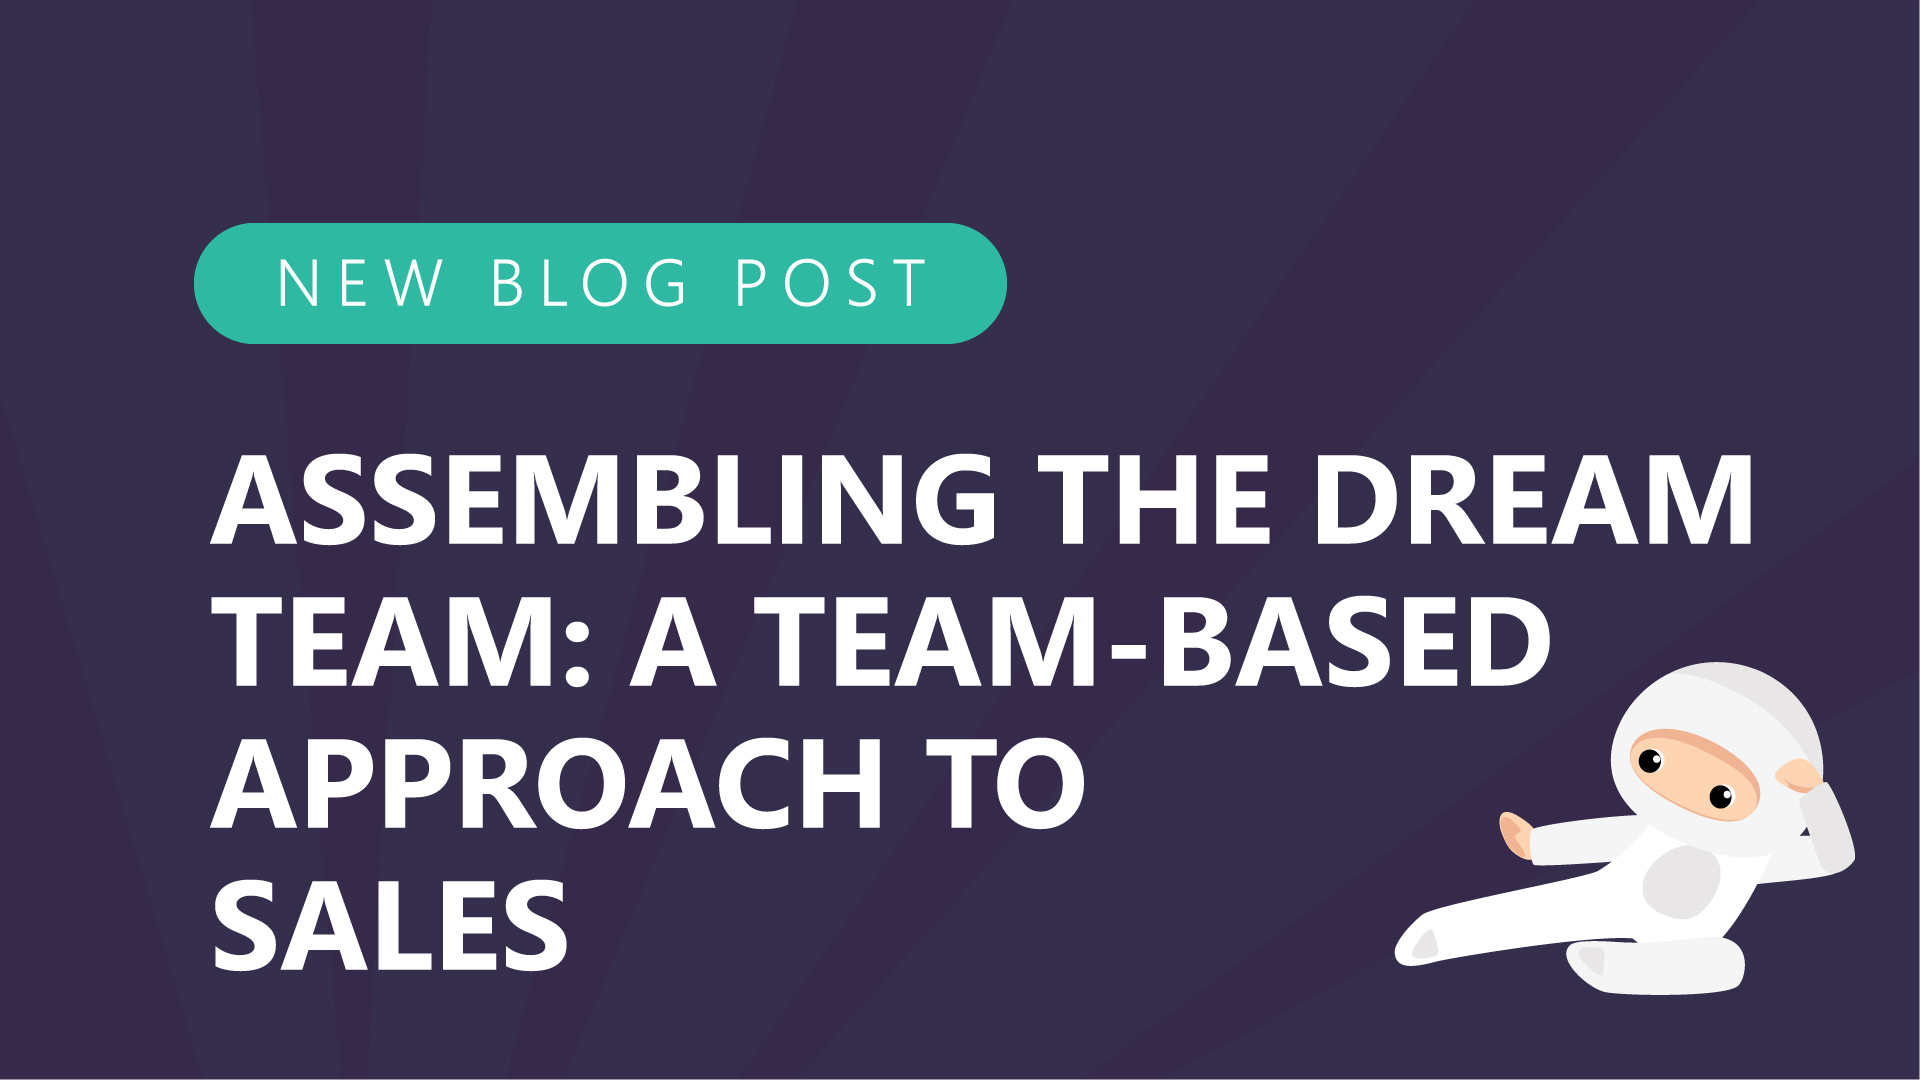 25-Assembling-the-Dream-Team-A-Team-Based-Approach-to-Sales.jpg